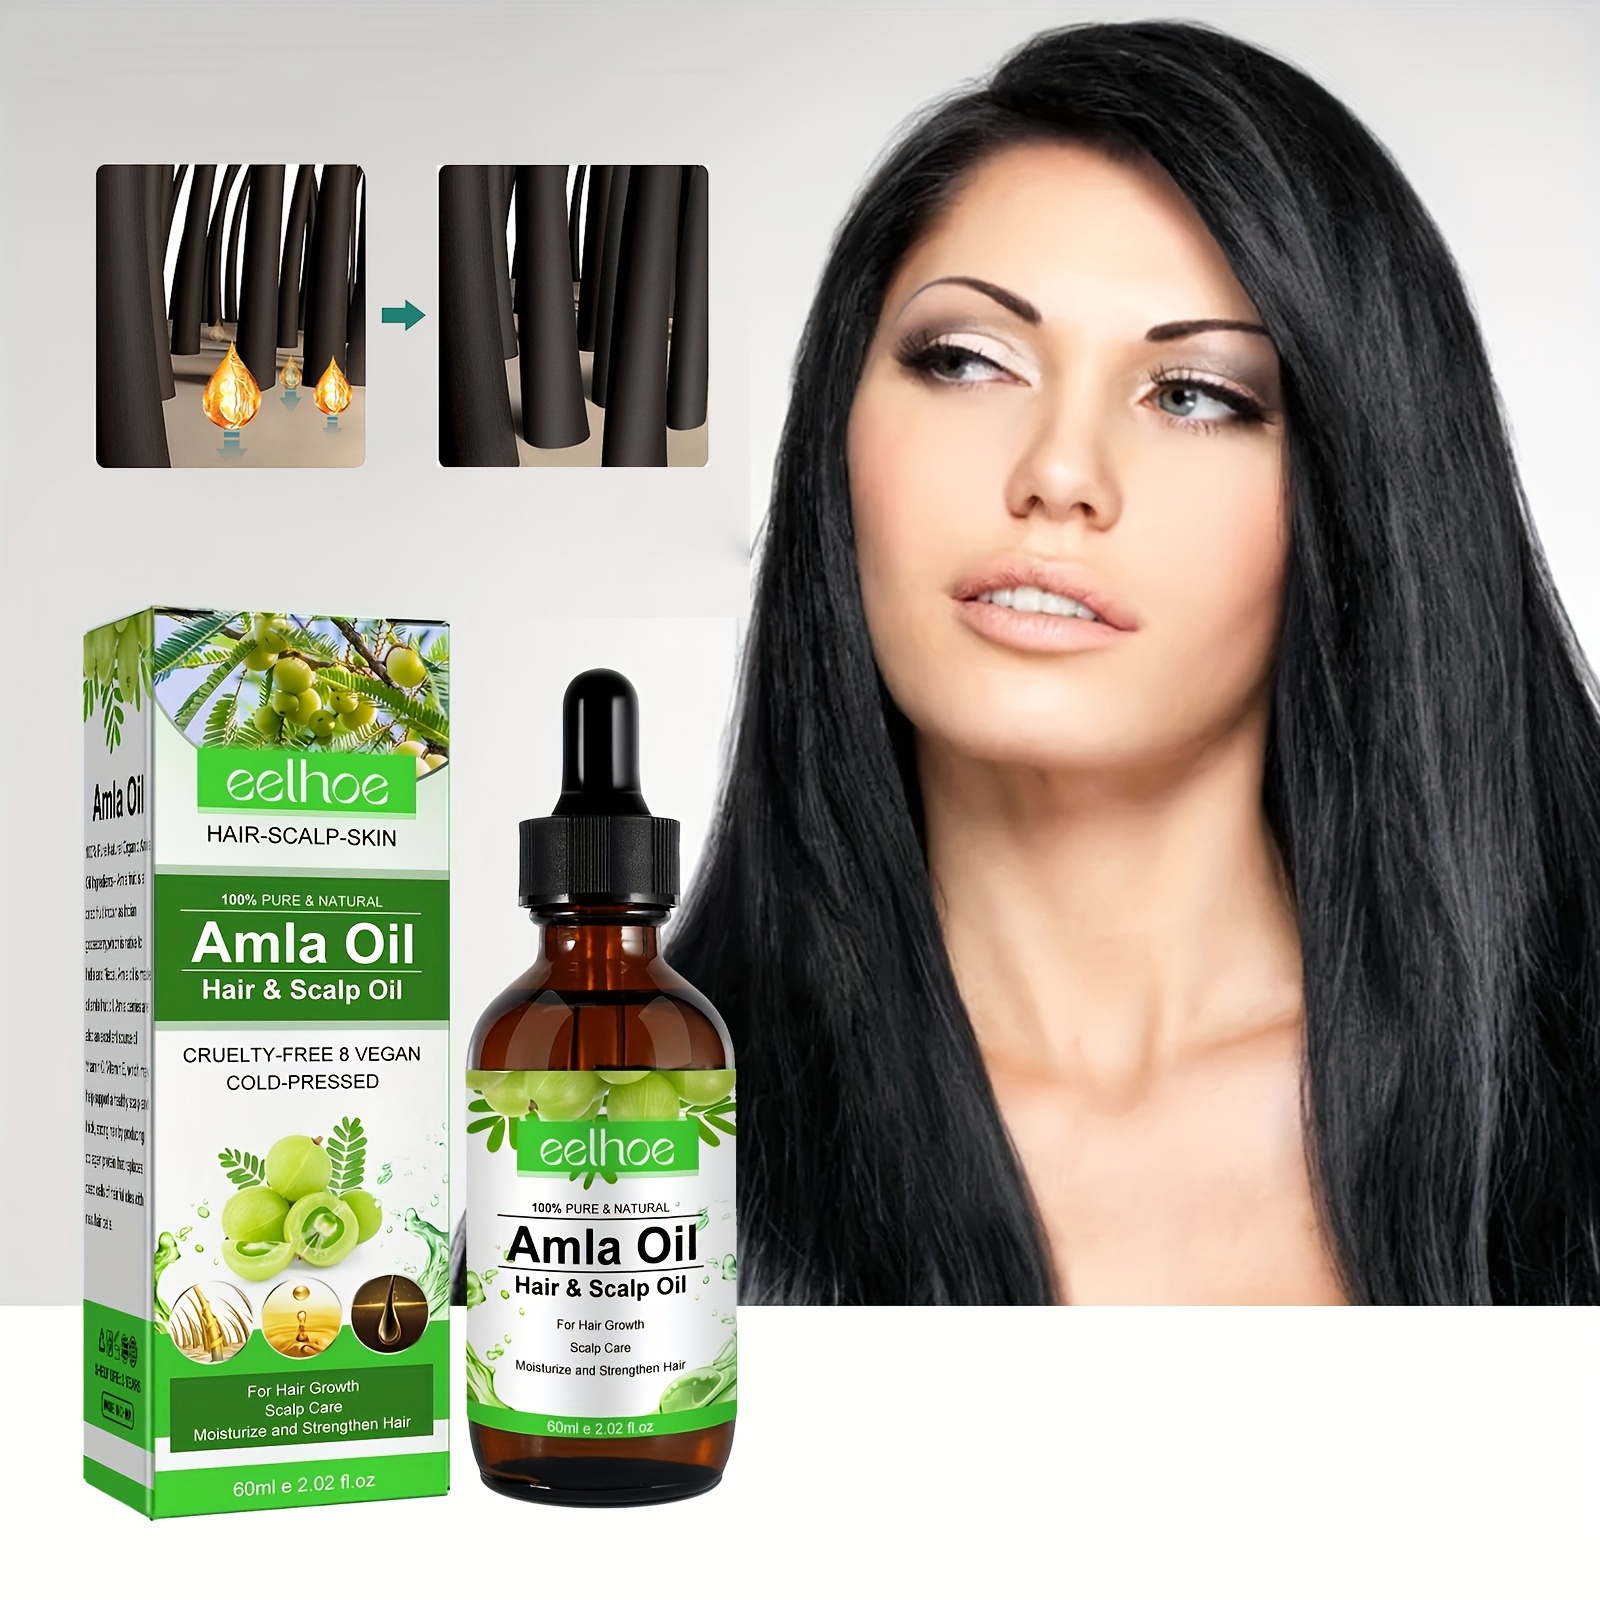 Dabur Amla Hair Oil - Amla Oil Amla Hair Oil Amla Oil for Healthy Hair and  Moisturized Scalp Indian Hair Oil for Men and Women Bio Oil for Hair  Natural Care for